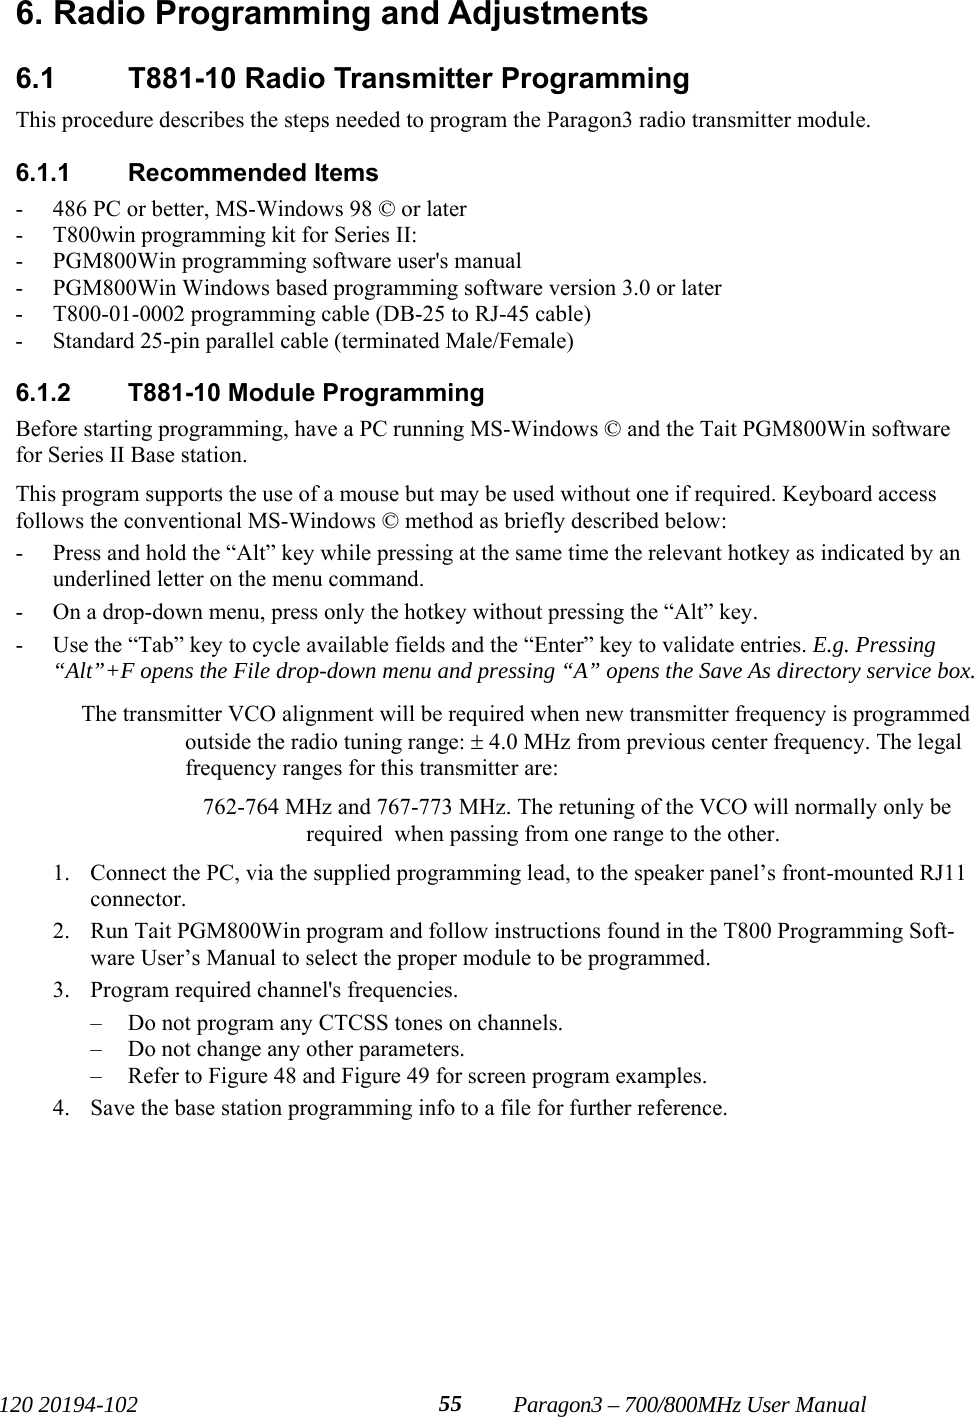   120 20194-102   Paragon3 – 700/800MHz User Manual 556. Radio Programming and Adjustments 6.1 T881-10 Radio Transmitter Programming This procedure describes the steps needed to program the Paragon3 radio transmitter module.  6.1.1 Recommended Items - 486 PC or better, MS-Windows 98 © or later - T800win programming kit for Series II: - PGM800Win programming software user&apos;s manual - PGM800Win Windows based programming software version 3.0 or later - T800-01-0002 programming cable (DB-25 to RJ-45 cable) - Standard 25-pin parallel cable (terminated Male/Female) 6.1.2  T881-10 Module Programming Before starting programming, have a PC running MS-Windows © and the Tait PGM800Win software for Series II Base station.  This program supports the use of a mouse but may be used without one if required. Keyboard access follows the conventional MS-Windows © method as briefly described below: - Press and hold the “Alt” key while pressing at the same time the relevant hotkey as indicated by an underlined letter on the menu command. - On a drop-down menu, press only the hotkey without pressing the “Alt” key.  - Use the “Tab” key to cycle available fields and the “Enter” key to validate entries. E.g. Pressing “Alt”+F opens the File drop-down menu and pressing “A” opens the Save As directory service box.  The transmitter VCO alignment will be required when new transmitter frequency is programmed outside the radio tuning range: ± 4.0 MHz from previous center frequency. The legal frequency ranges for this transmitter are: 762-764 MHz and 767-773 MHz. The retuning of the VCO will normally only be required  when passing from one range to the other. 1. Connect the PC, via the supplied programming lead, to the speaker panel’s front-mounted RJ11 connector. 2. Run Tait PGM800Win program and follow instructions found in the T800 Programming Soft-ware User’s Manual to select the proper module to be programmed. 3. Program required channel&apos;s frequencies. – Do not program any CTCSS tones on channels. – Do not change any other parameters. – Refer to Figure 48 and Figure 49 for screen program examples. 4. Save the base station programming info to a file for further reference.  